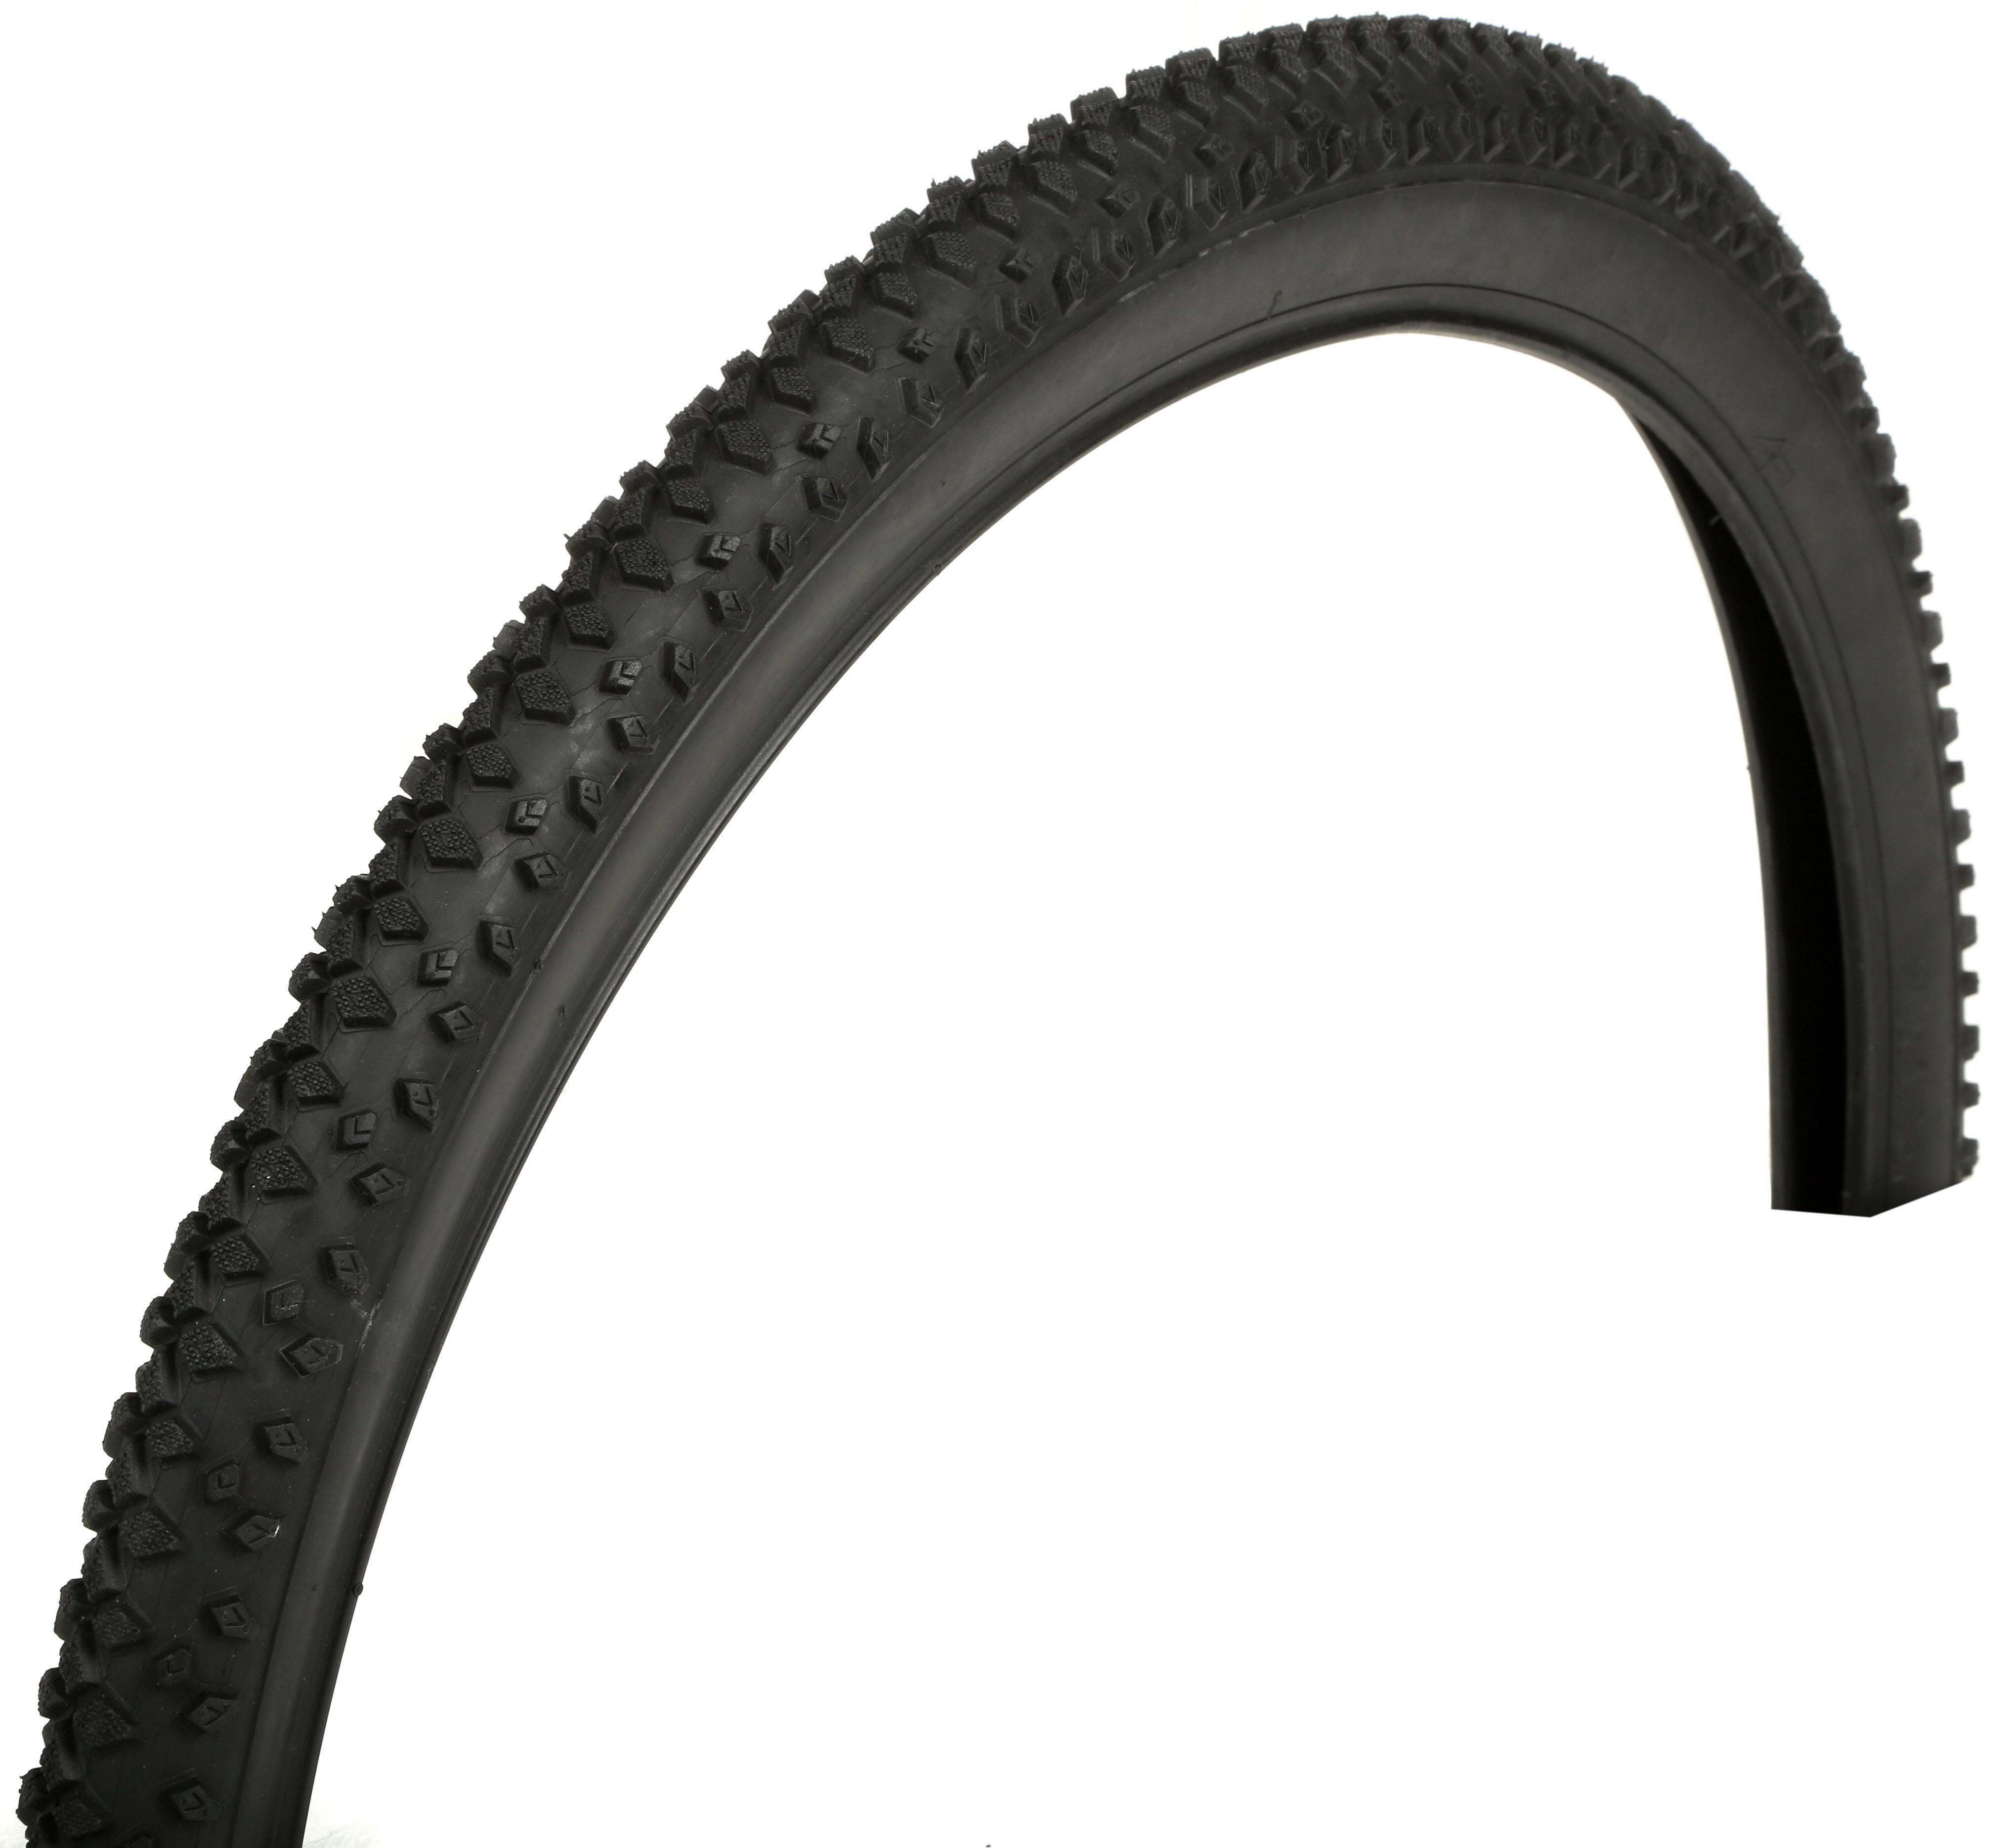 cycle tyre 26 x 1.95